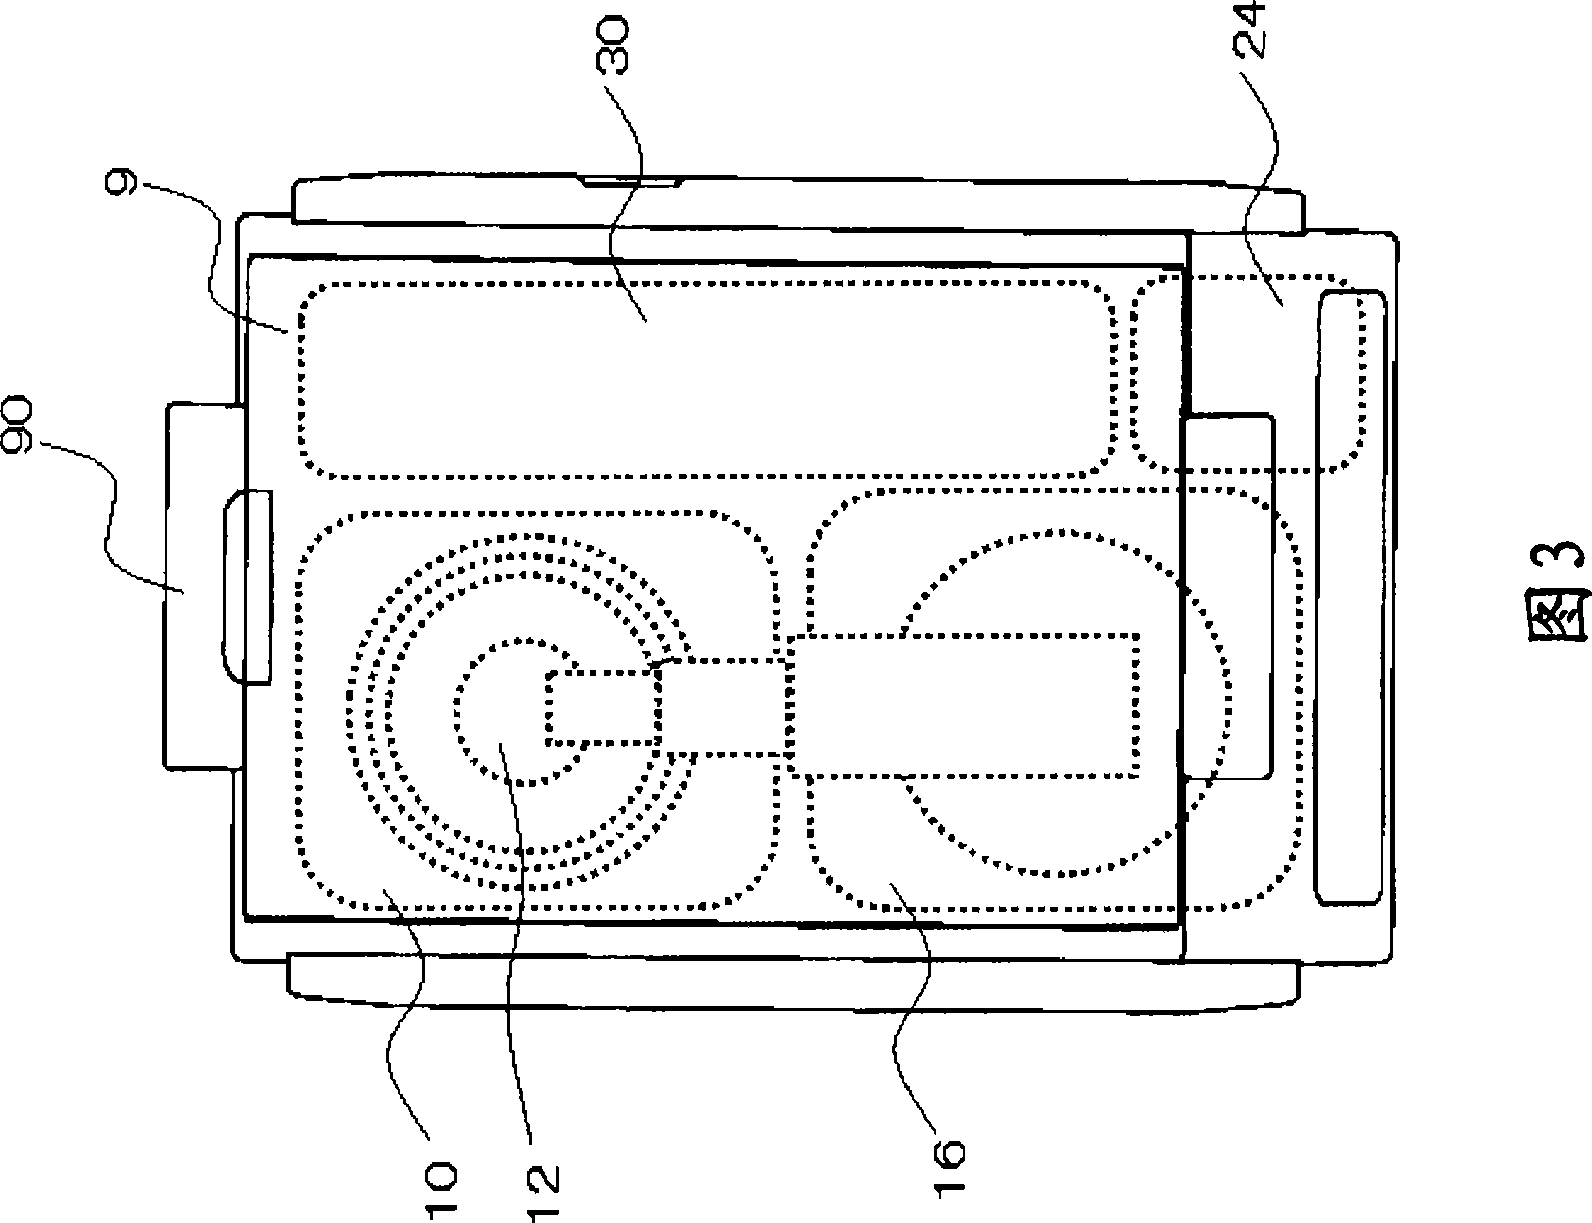 Waste treatment device